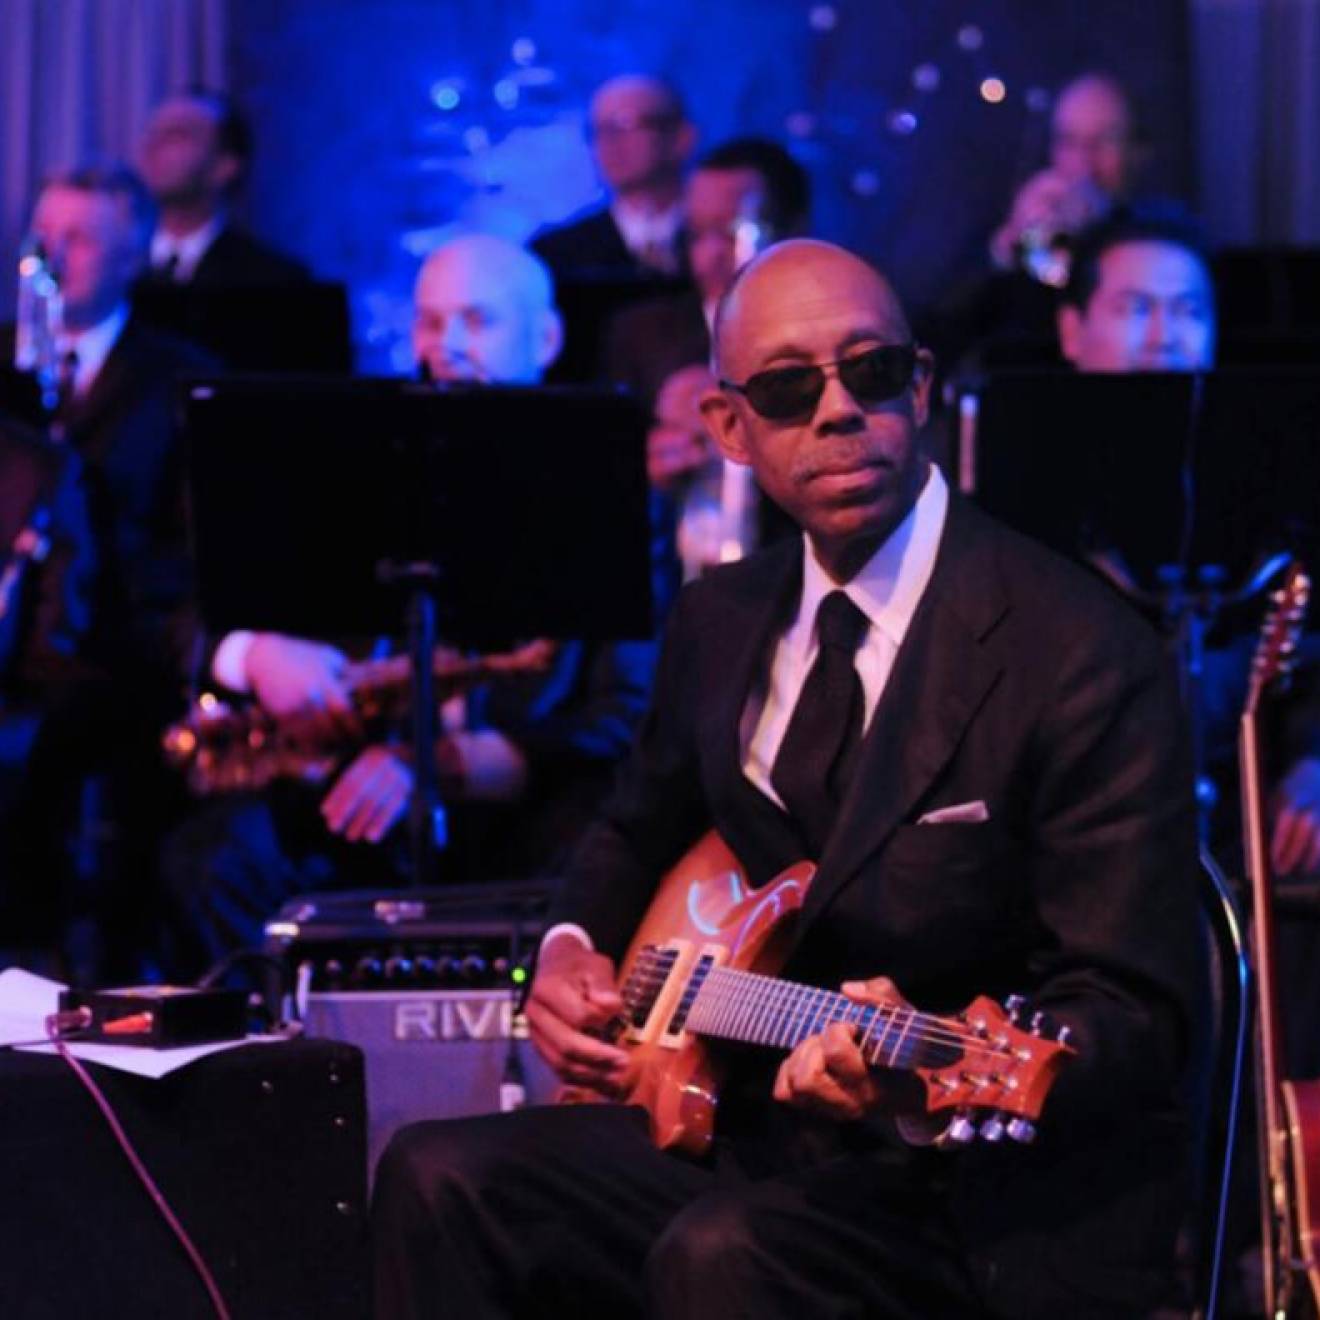 President Drake plays guitar on stage, wearing a black suit and sunglasses